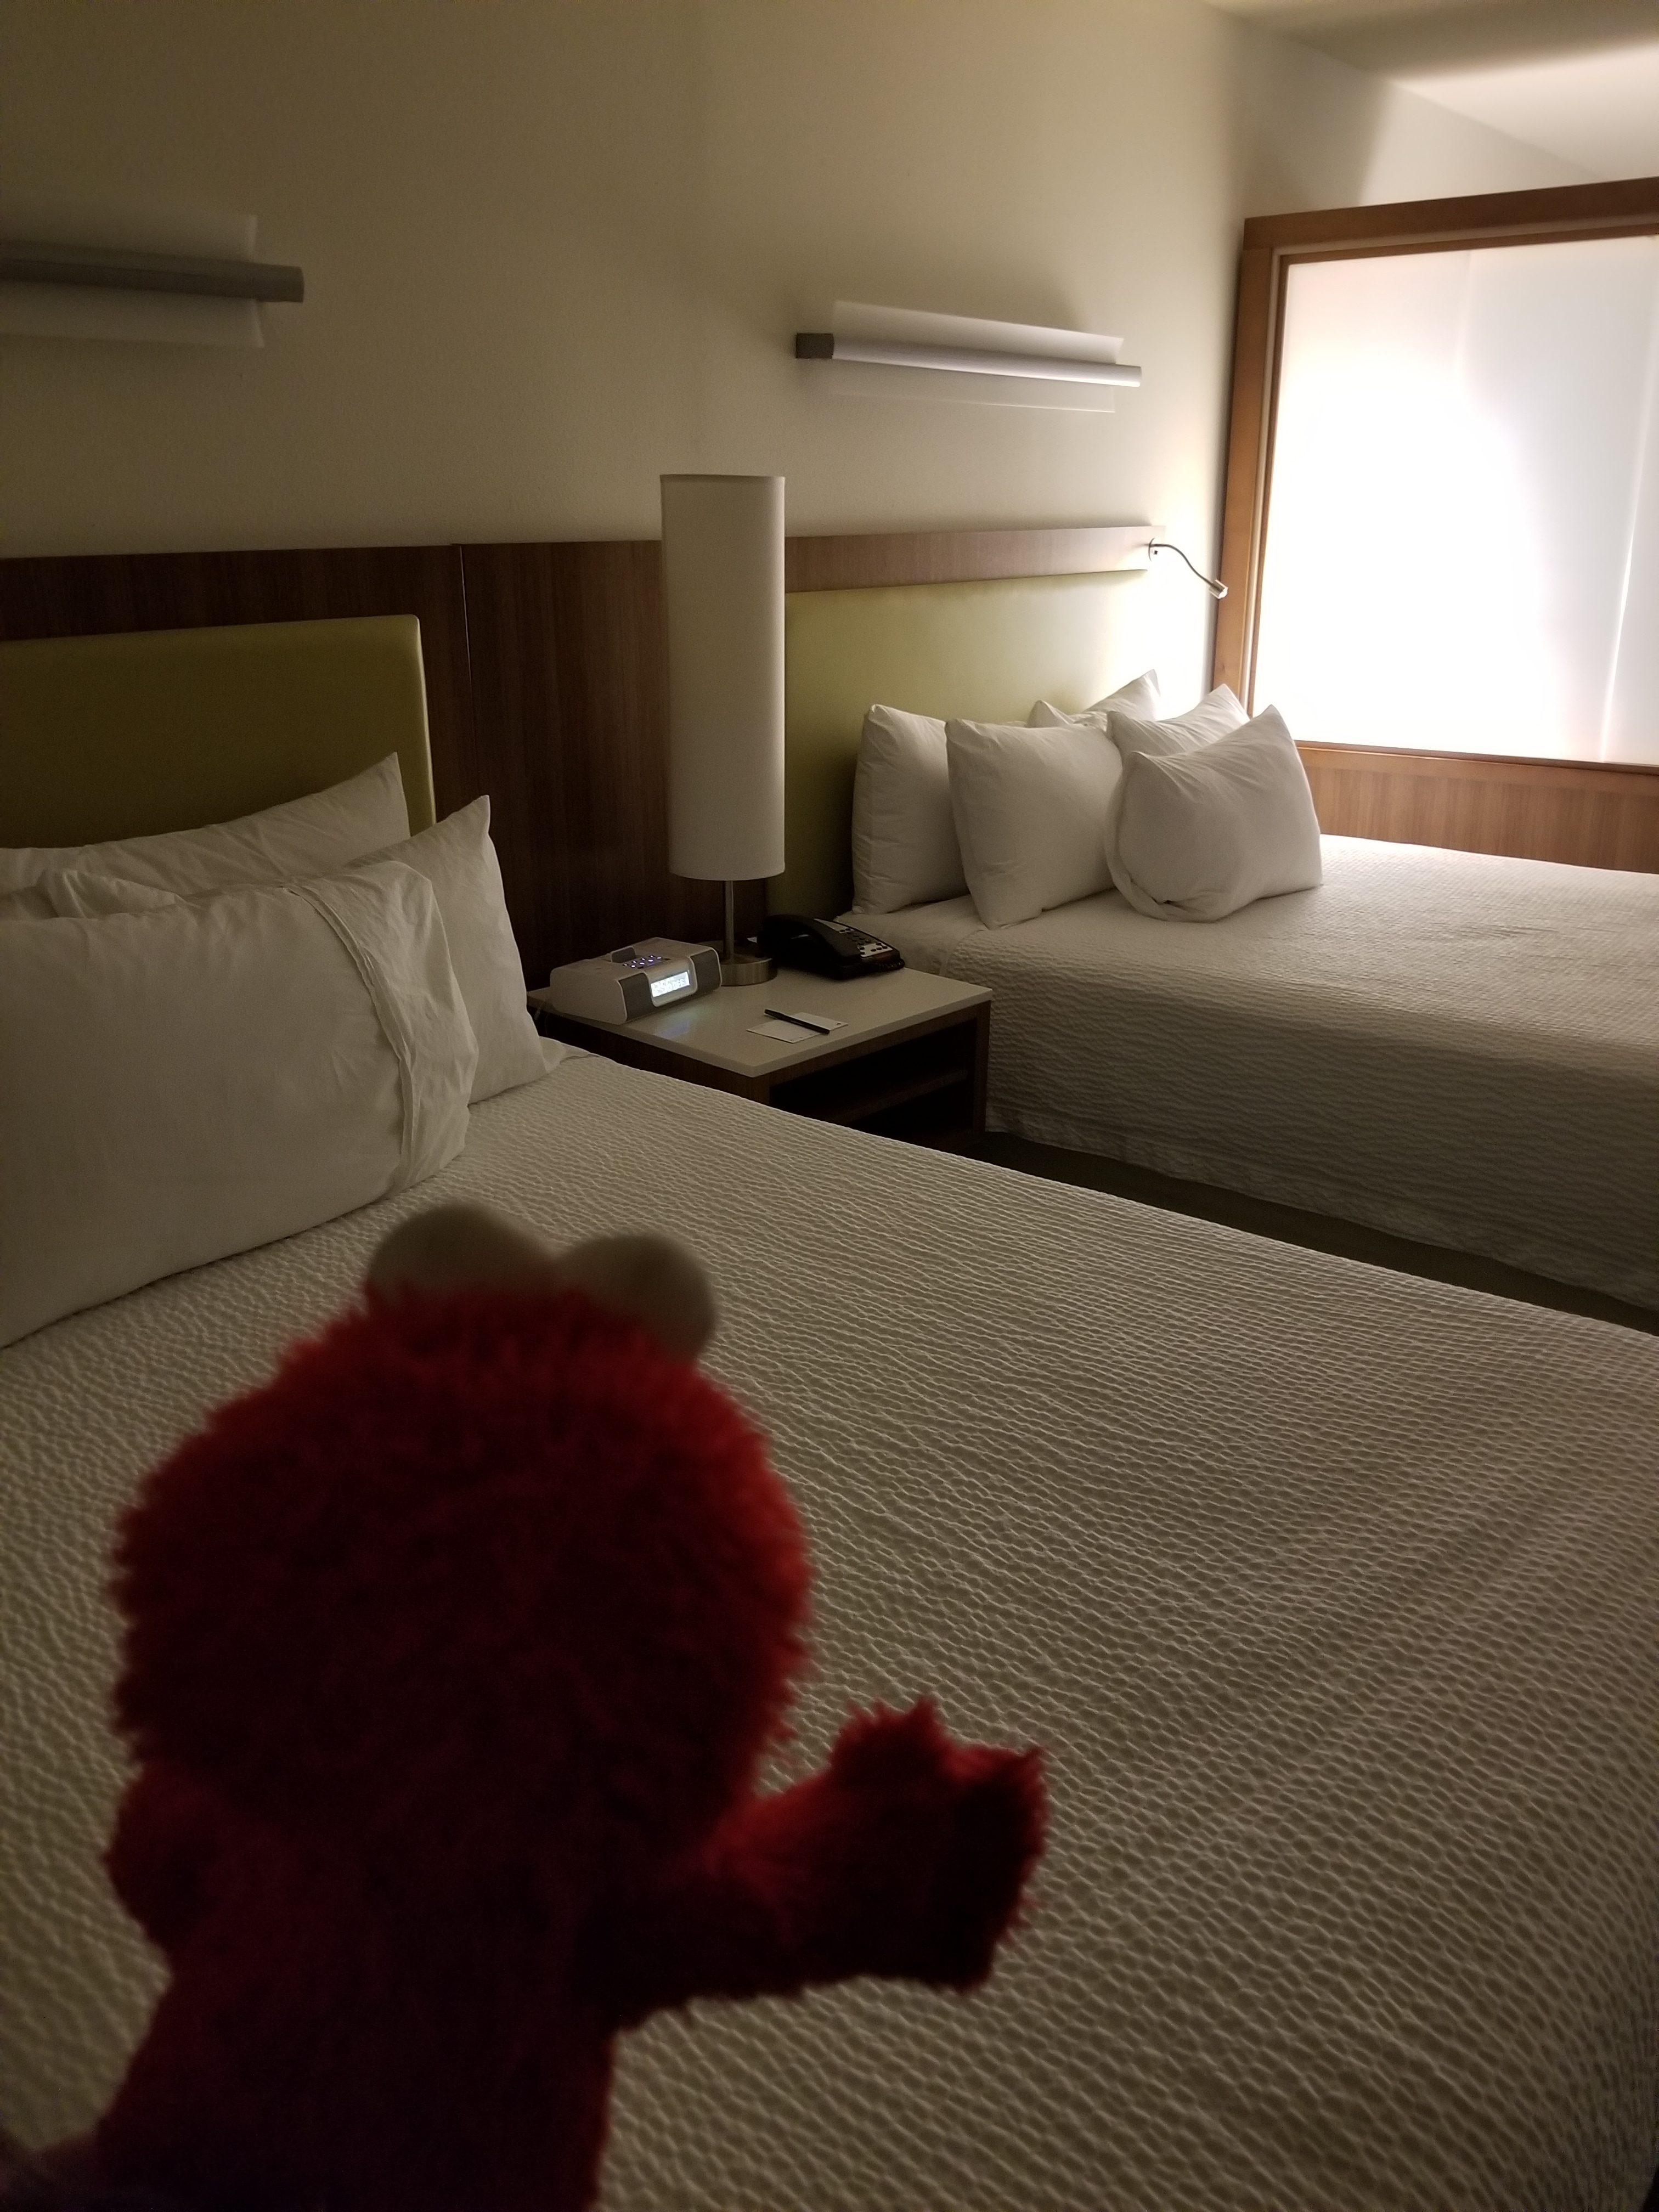 Which Bed Will Elmo Choose?